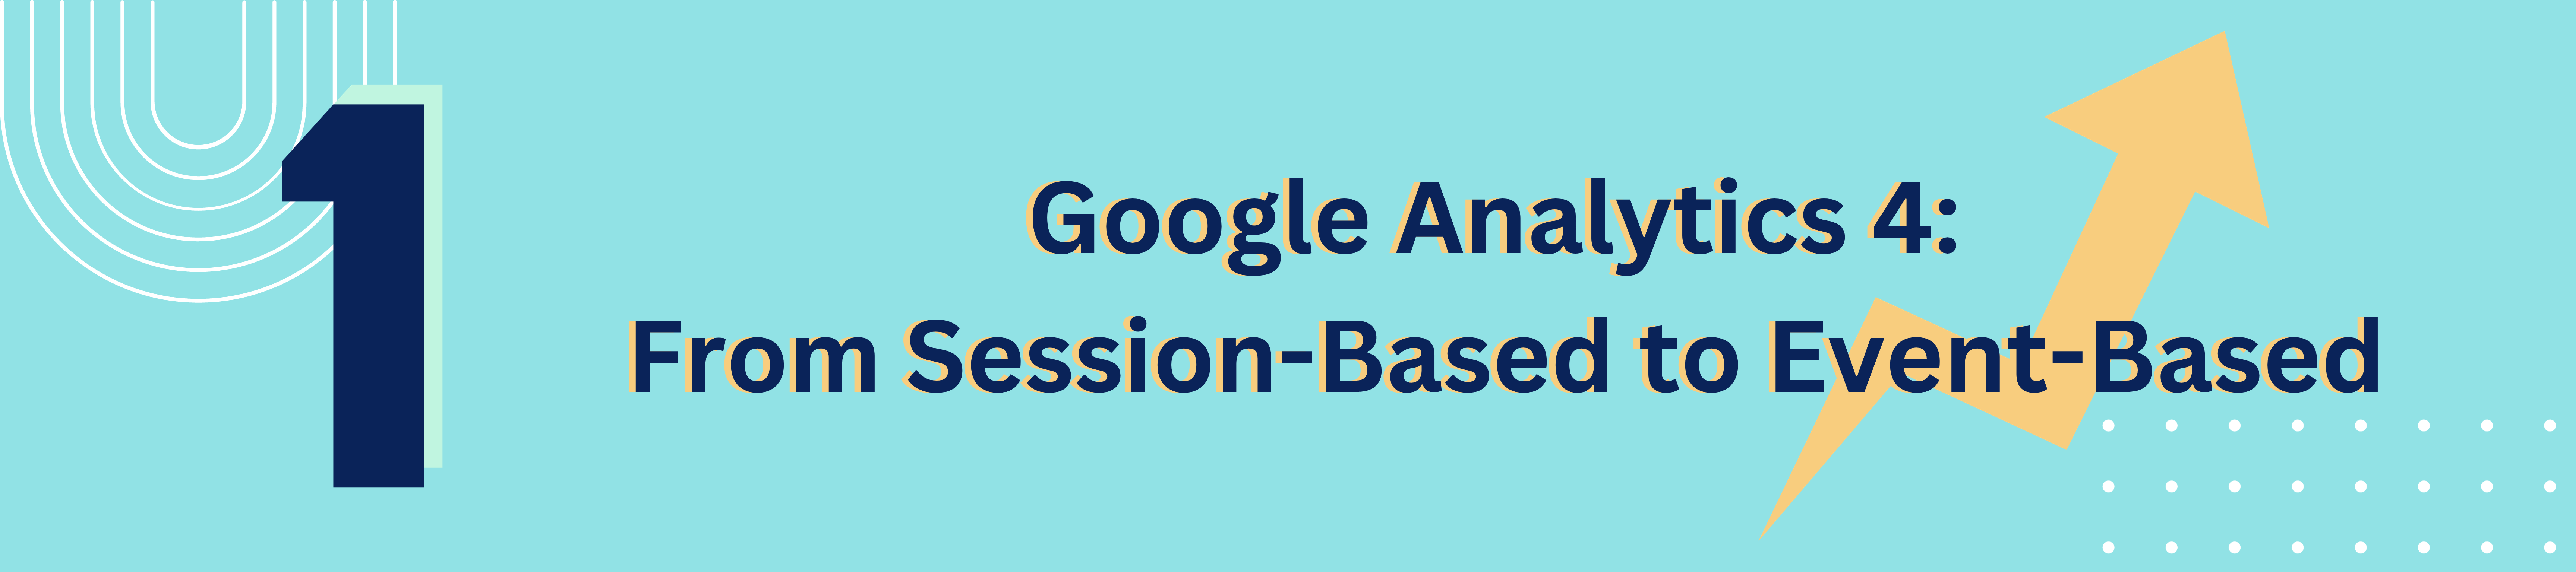 1. Google Analytics 4 From Session-Based to Event-Based